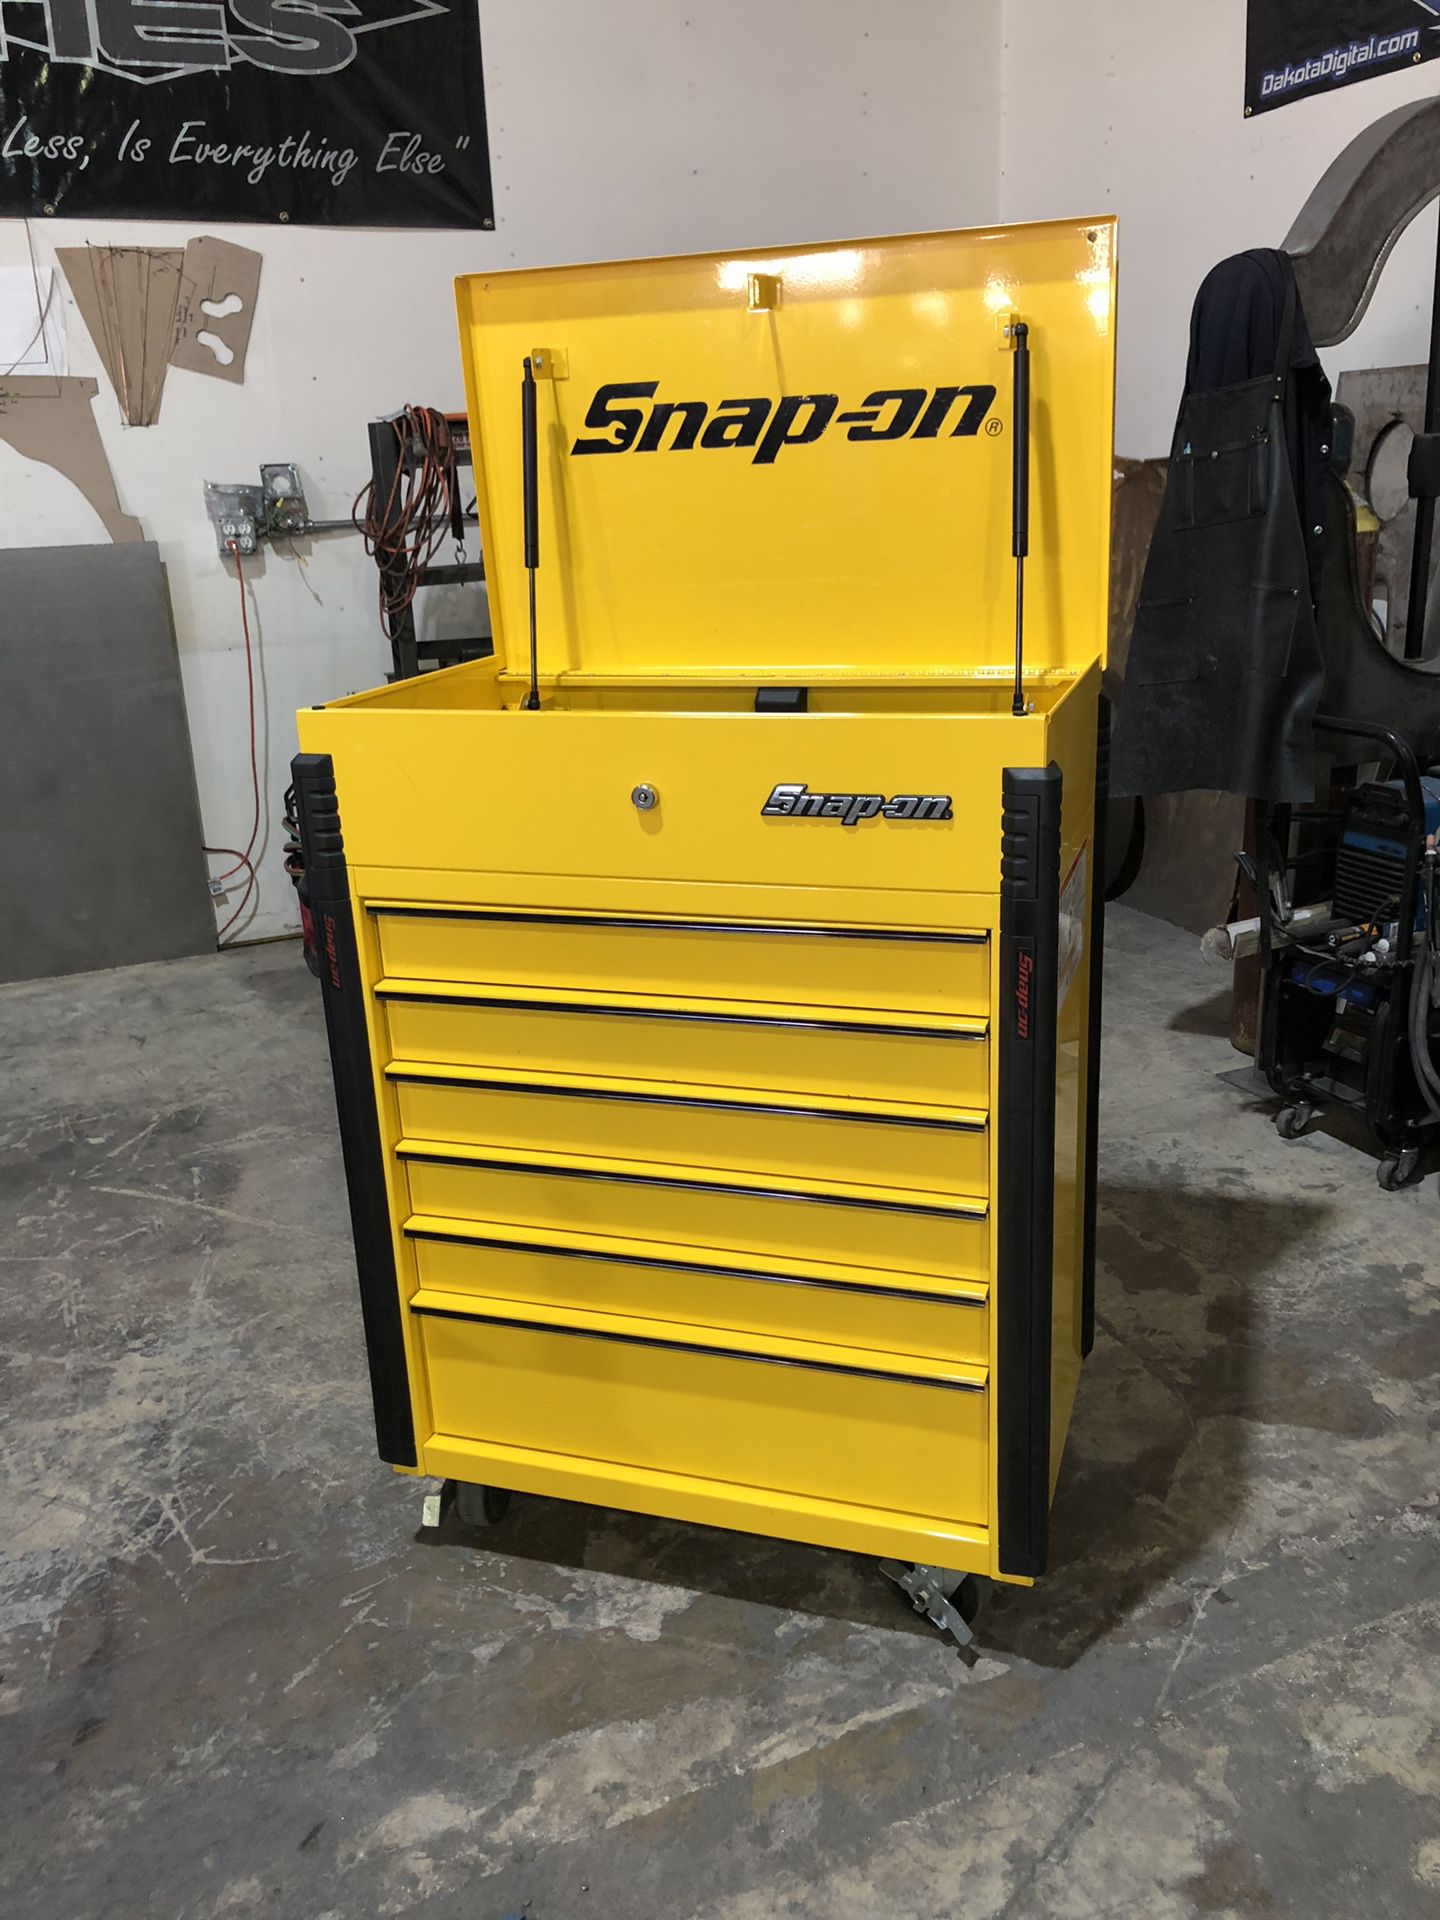 Snap on roll cart